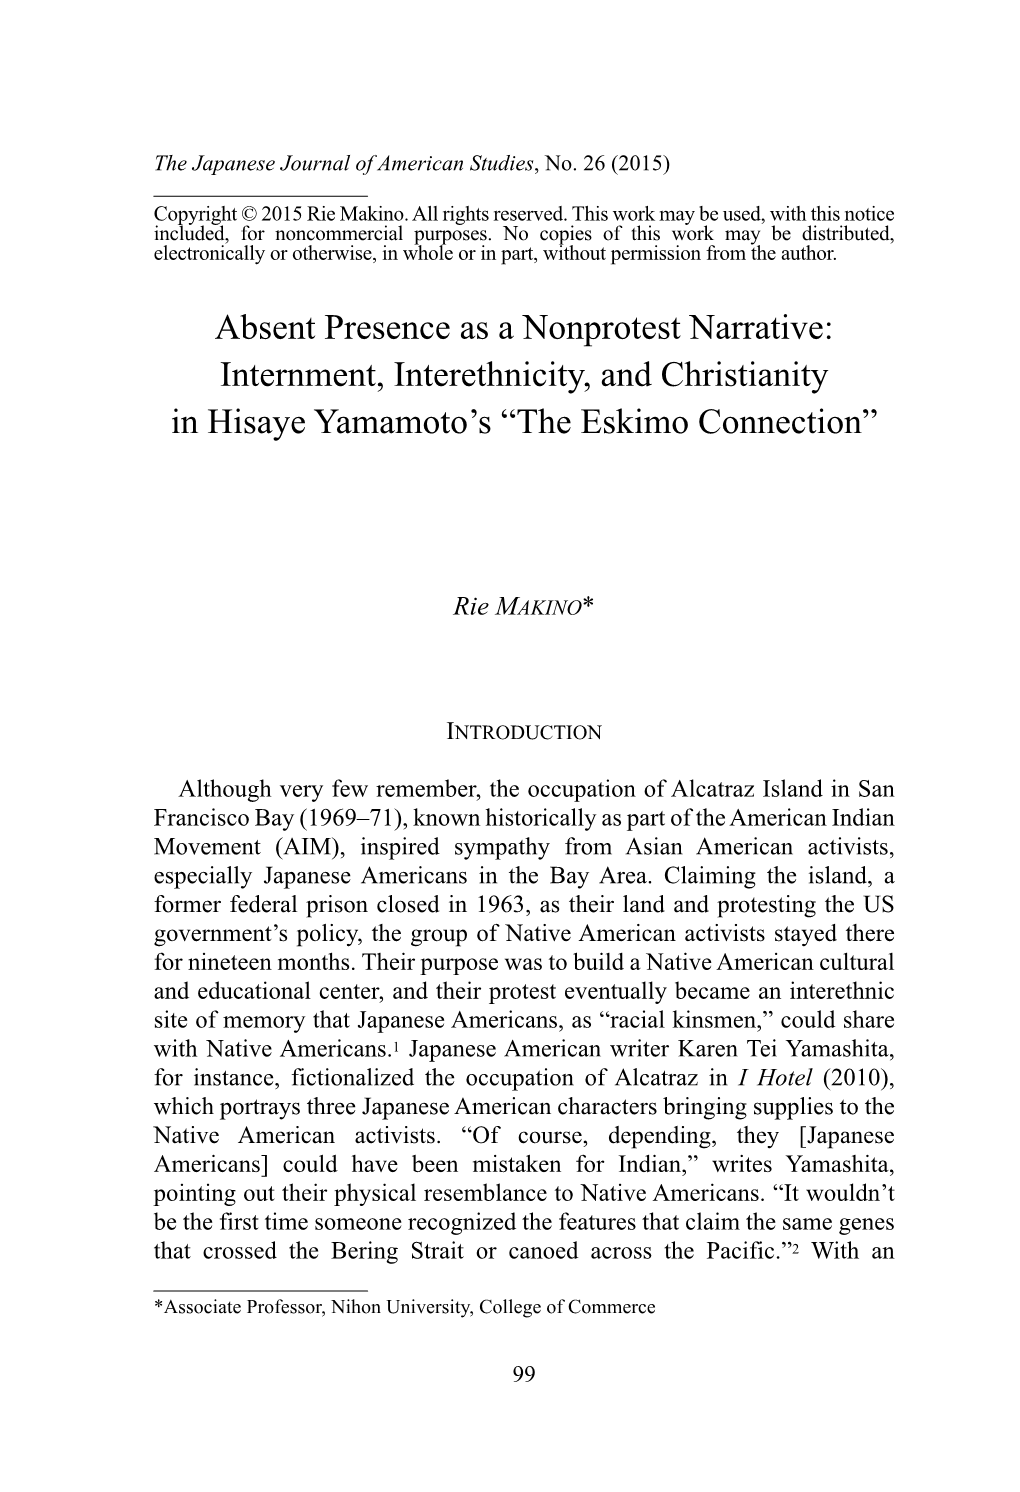 Absent Presence As a Nonprotest Narrative: Internment, Interethnicity, and Christianity in Hisaye Yamamoto’S “The Eskimo Connection”